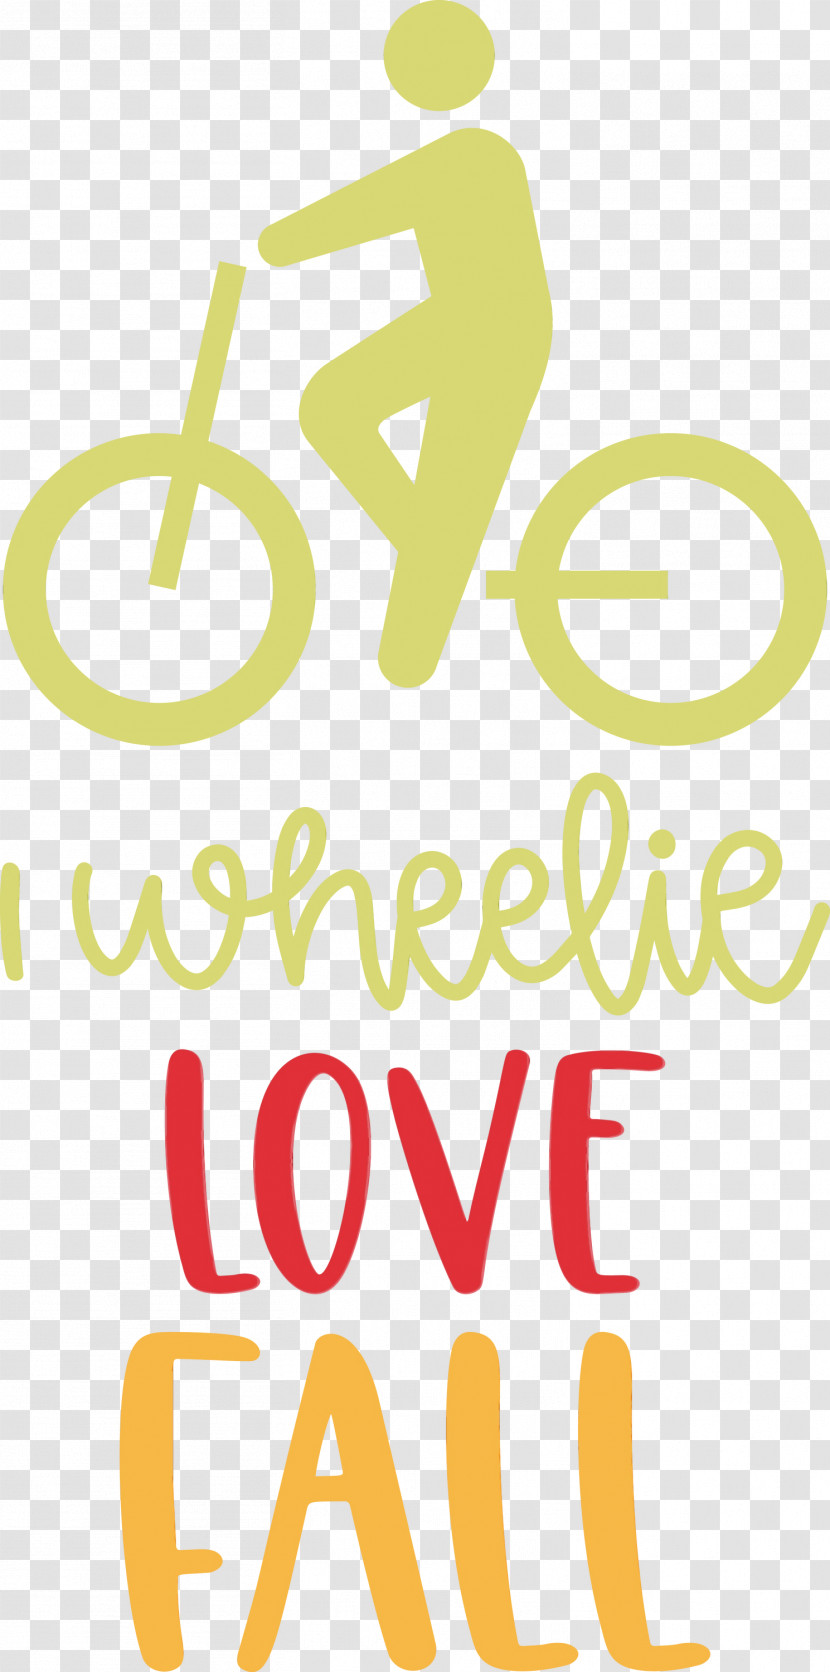 Logo Yellow Happiness Line Meter Transparent PNG